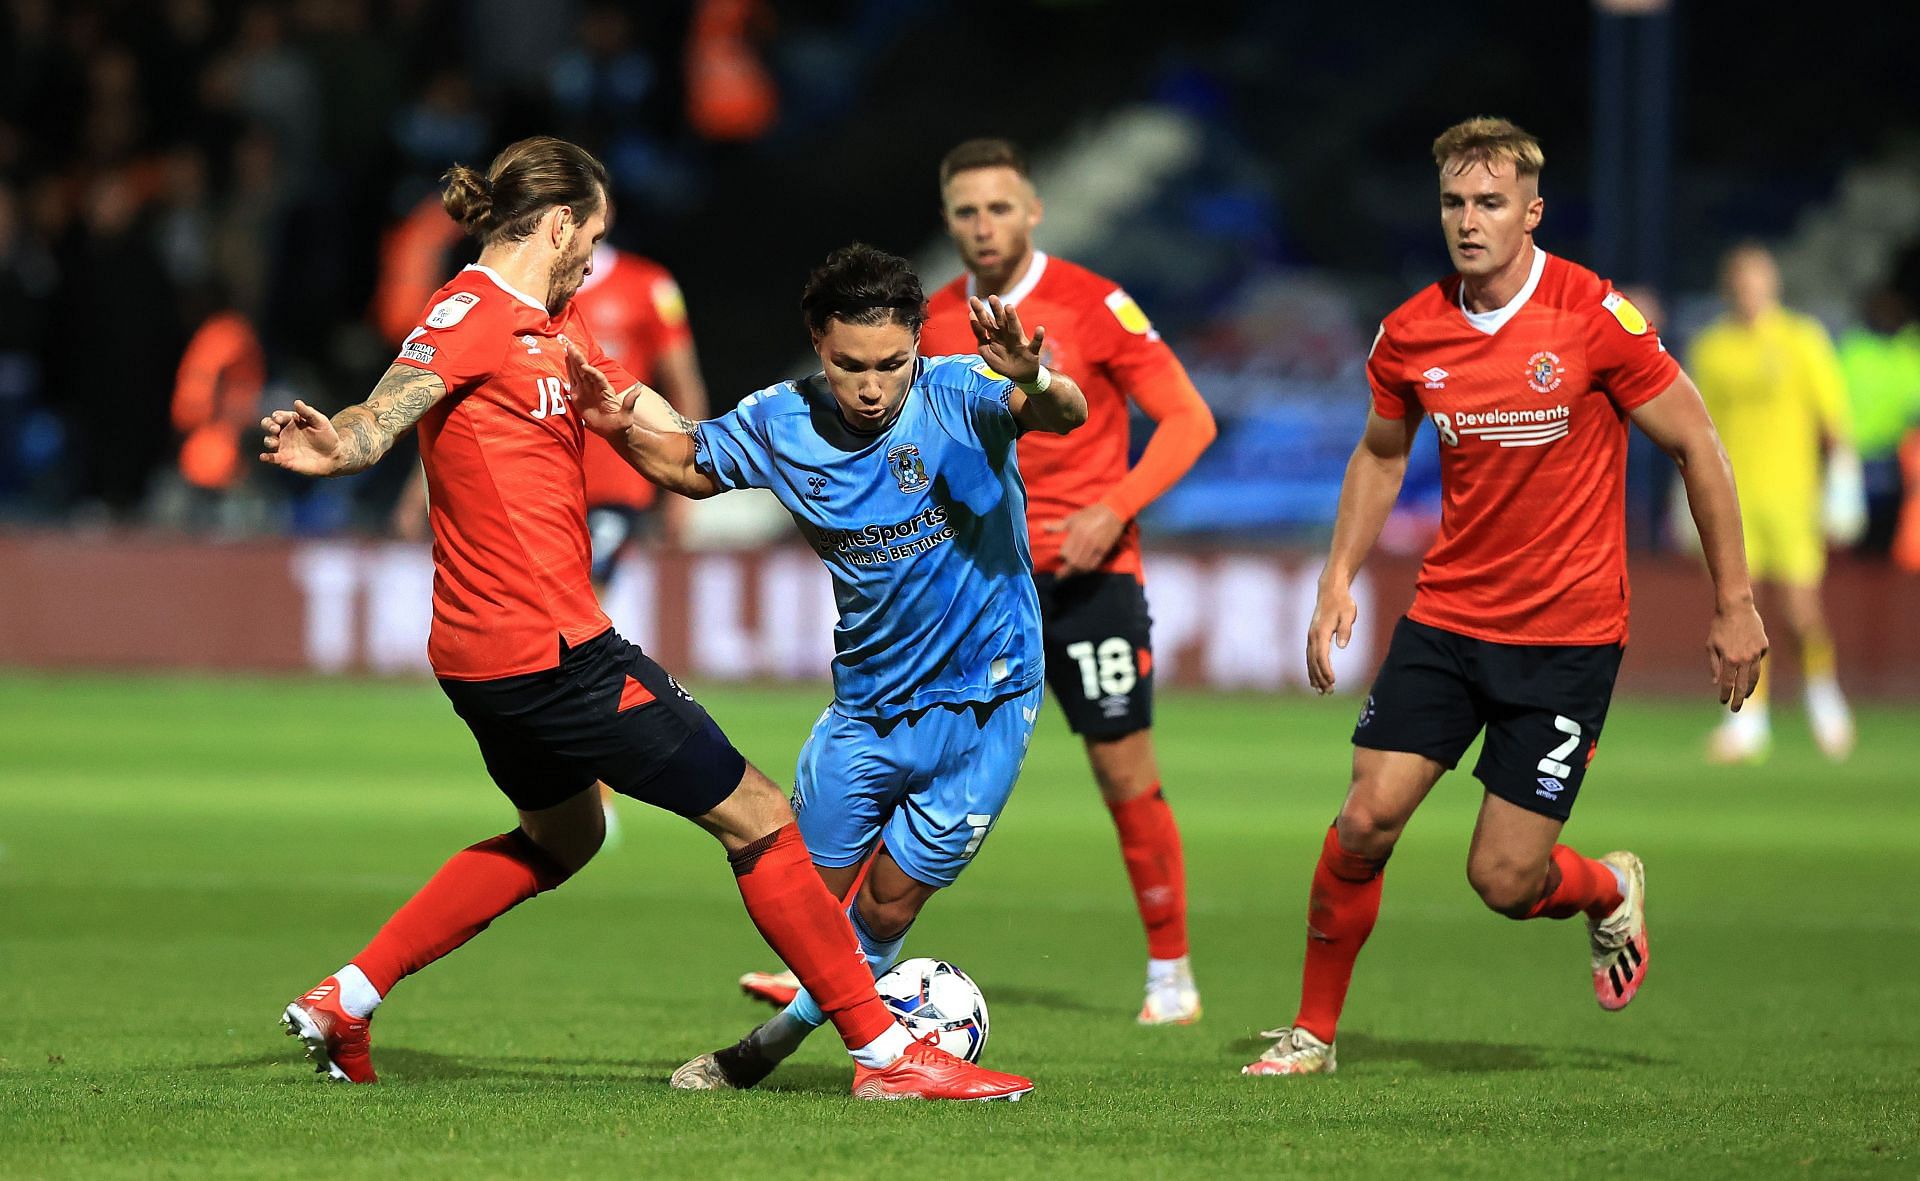 Coventry City take on Luton Town on Saturday